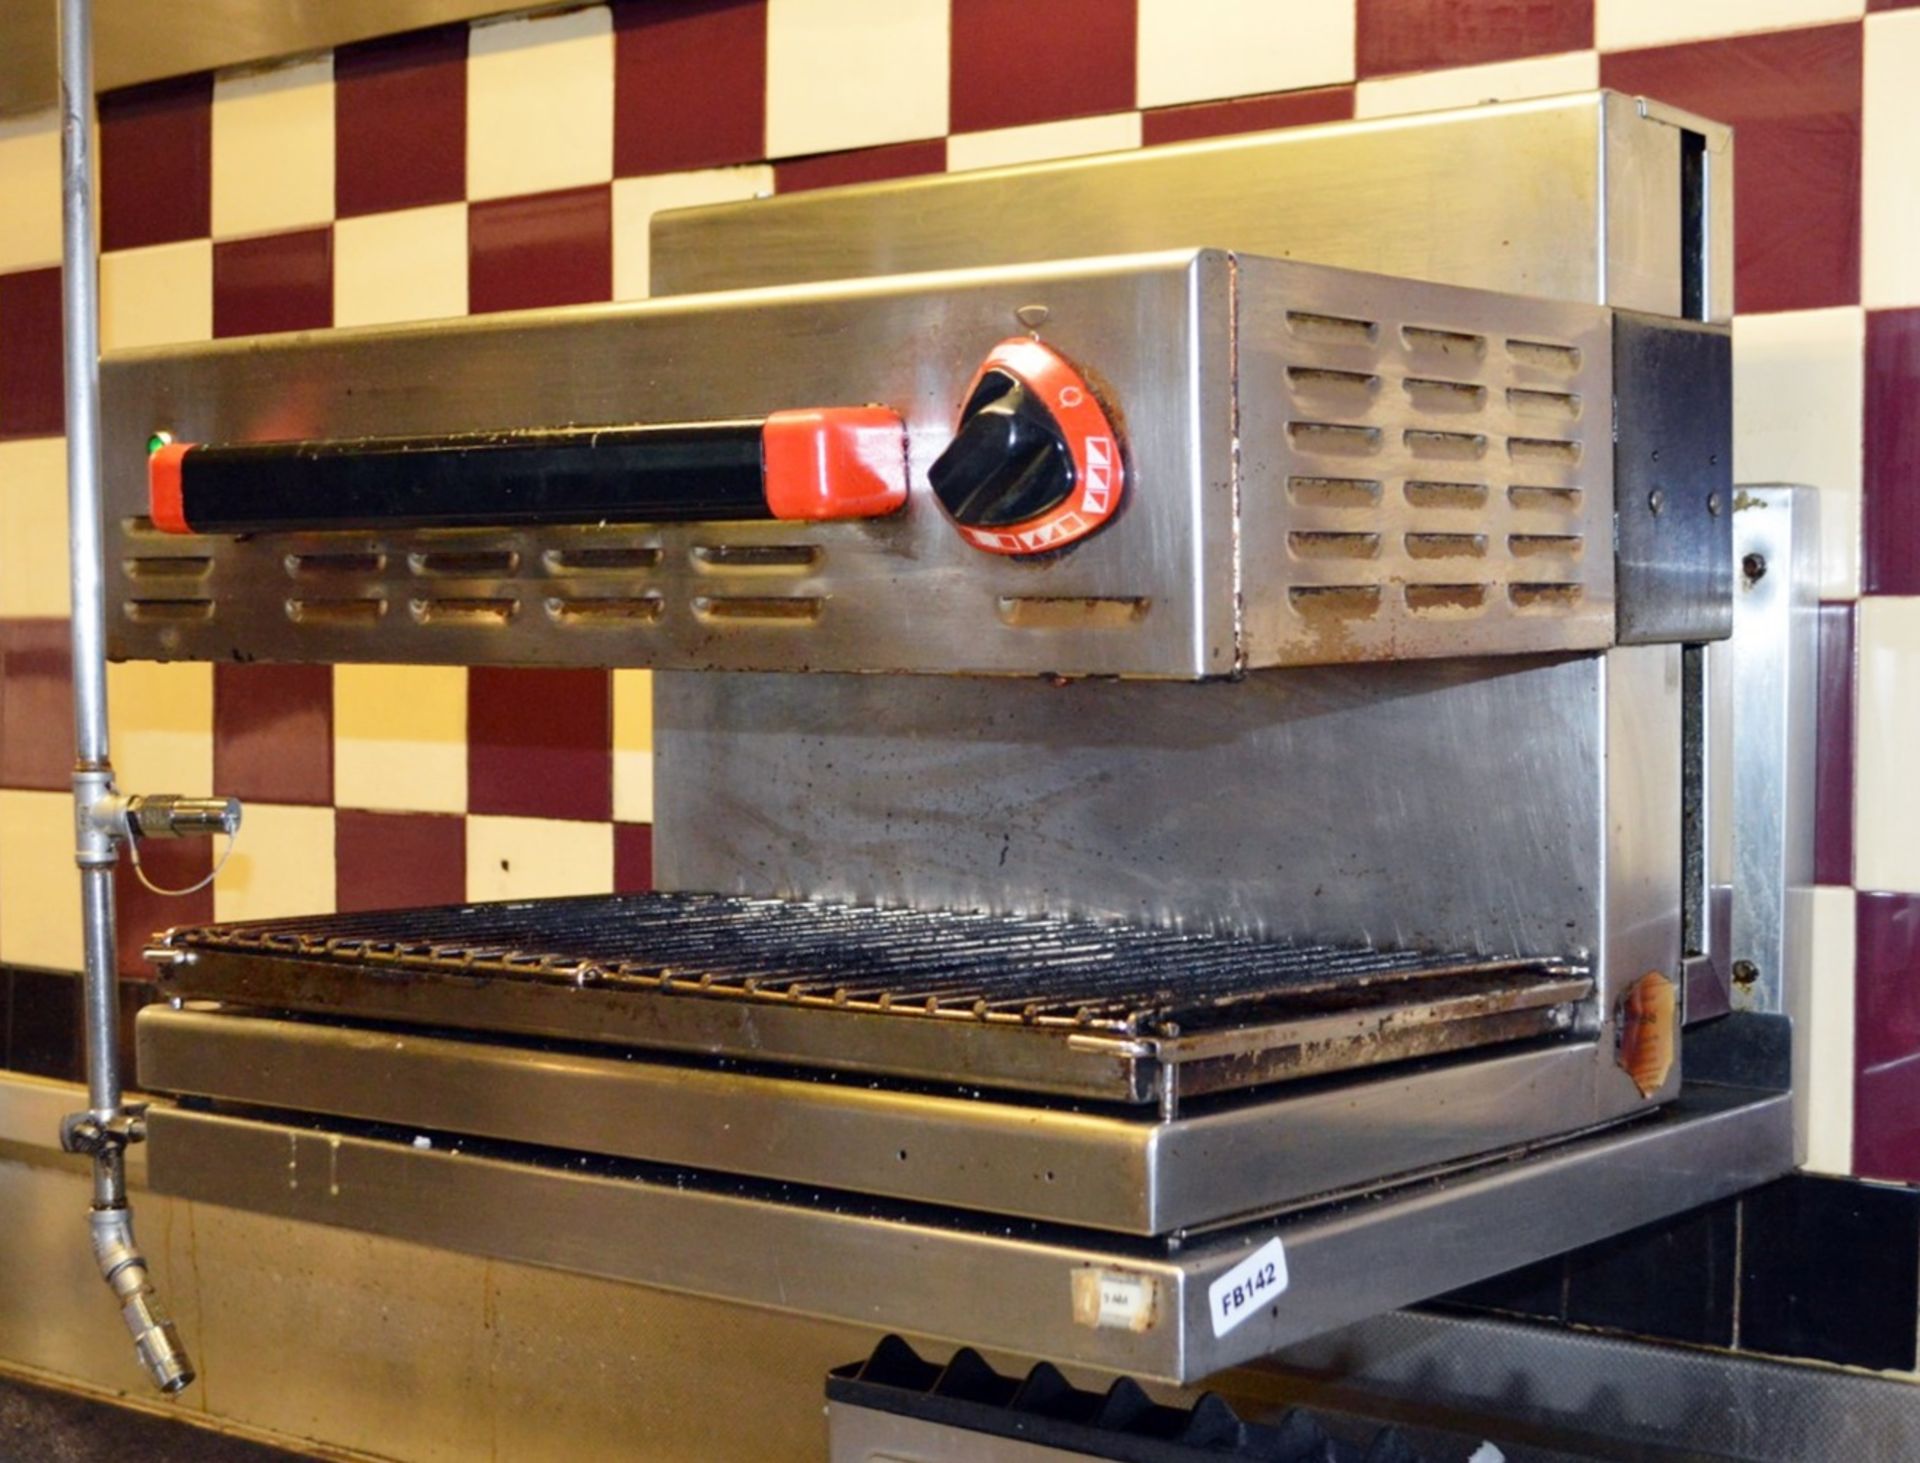 1 x Angelo Po Commercial Salamander Grill With Wall Mounted Shelf - Stainless Steel Construction